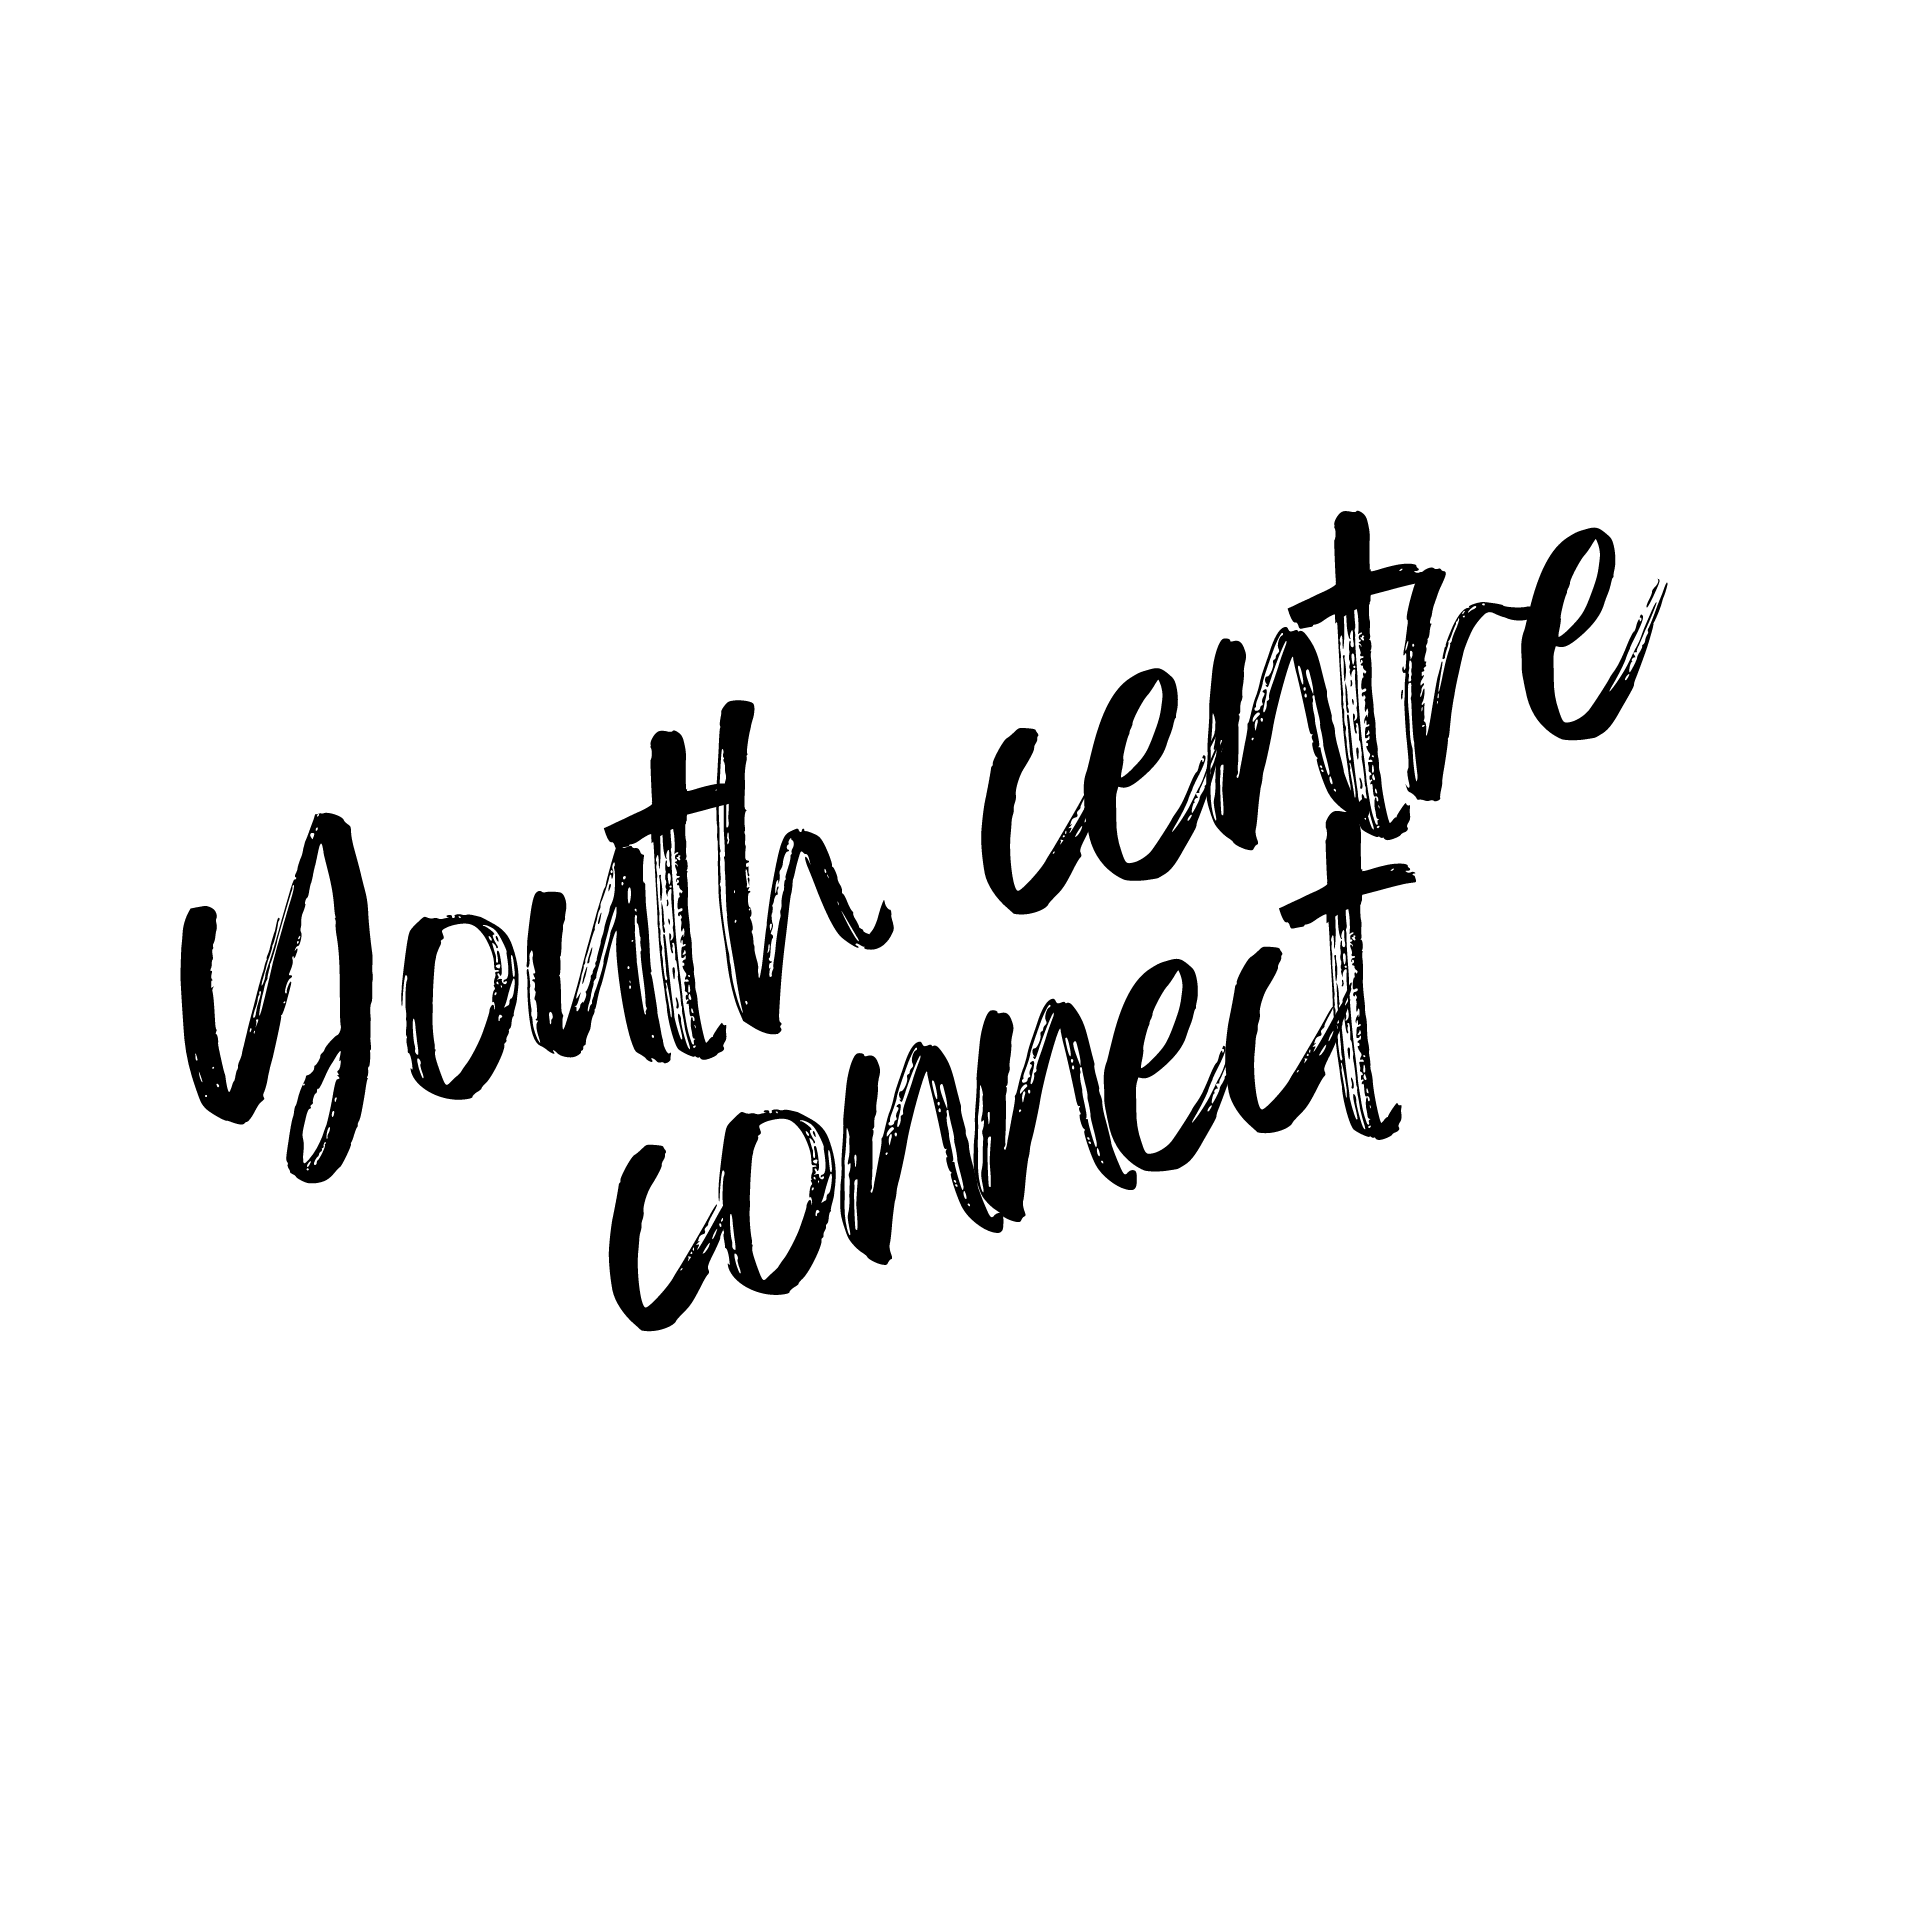 Youth Centre Connect